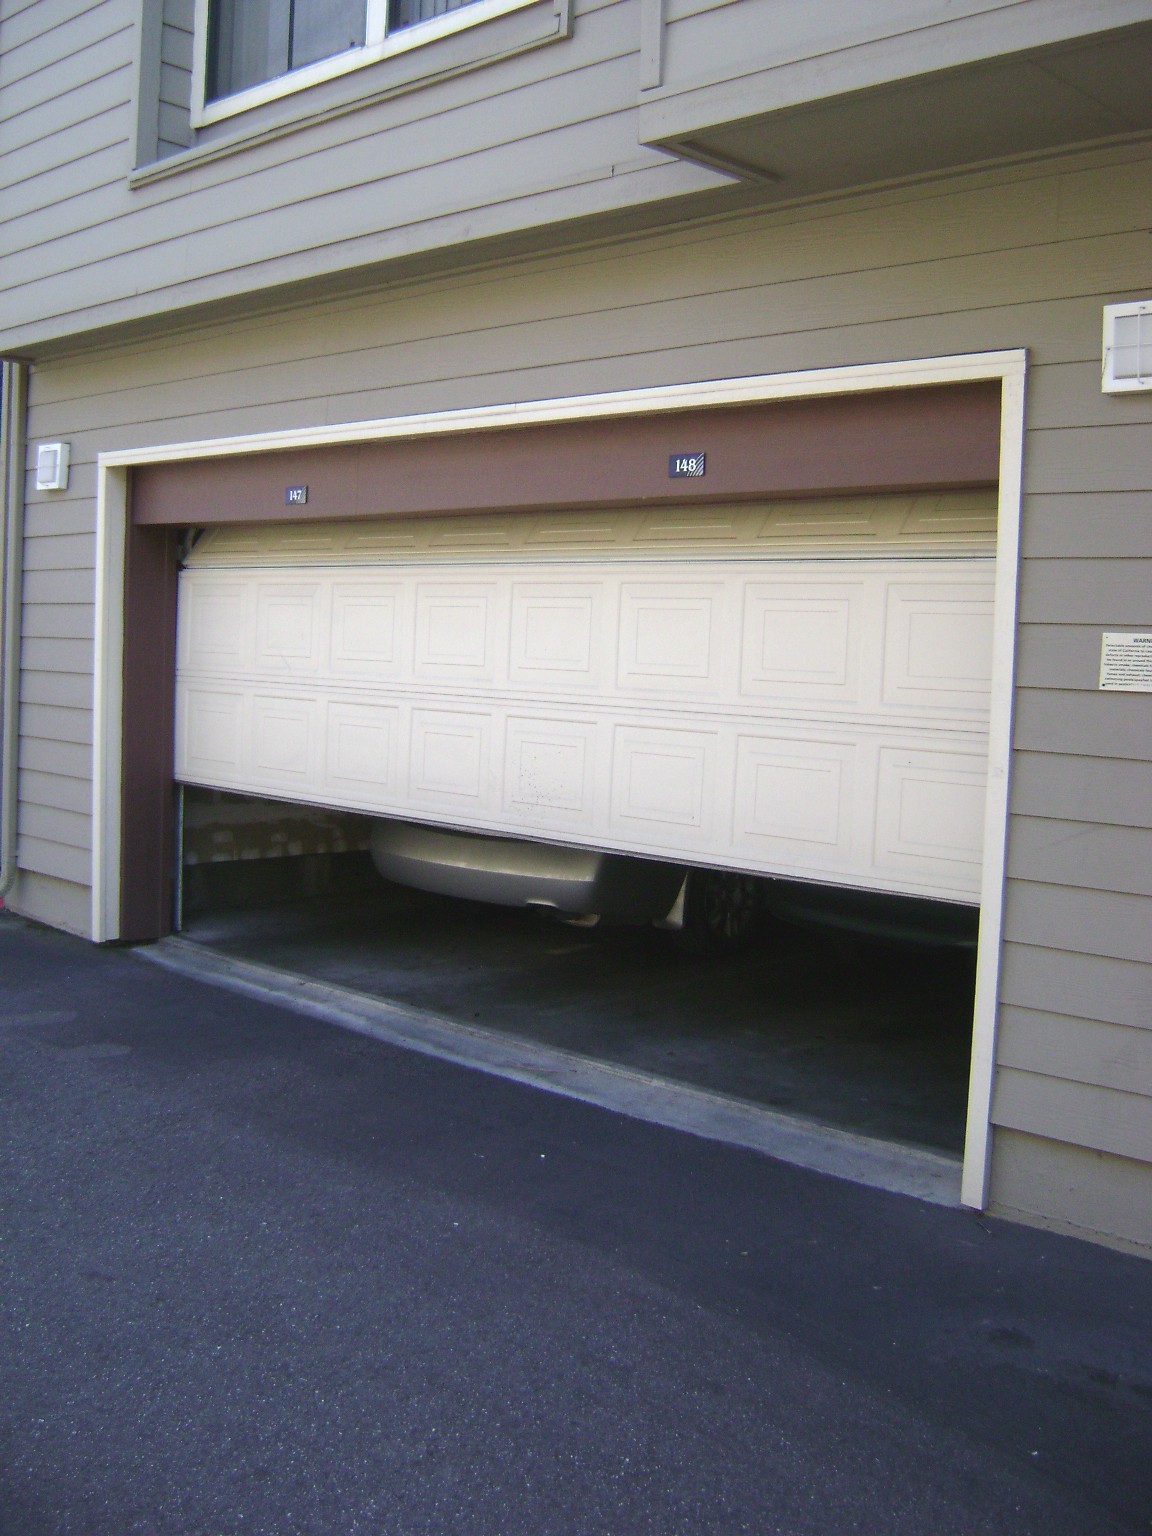 Automatic Garage Doors: Why They’re Worth It